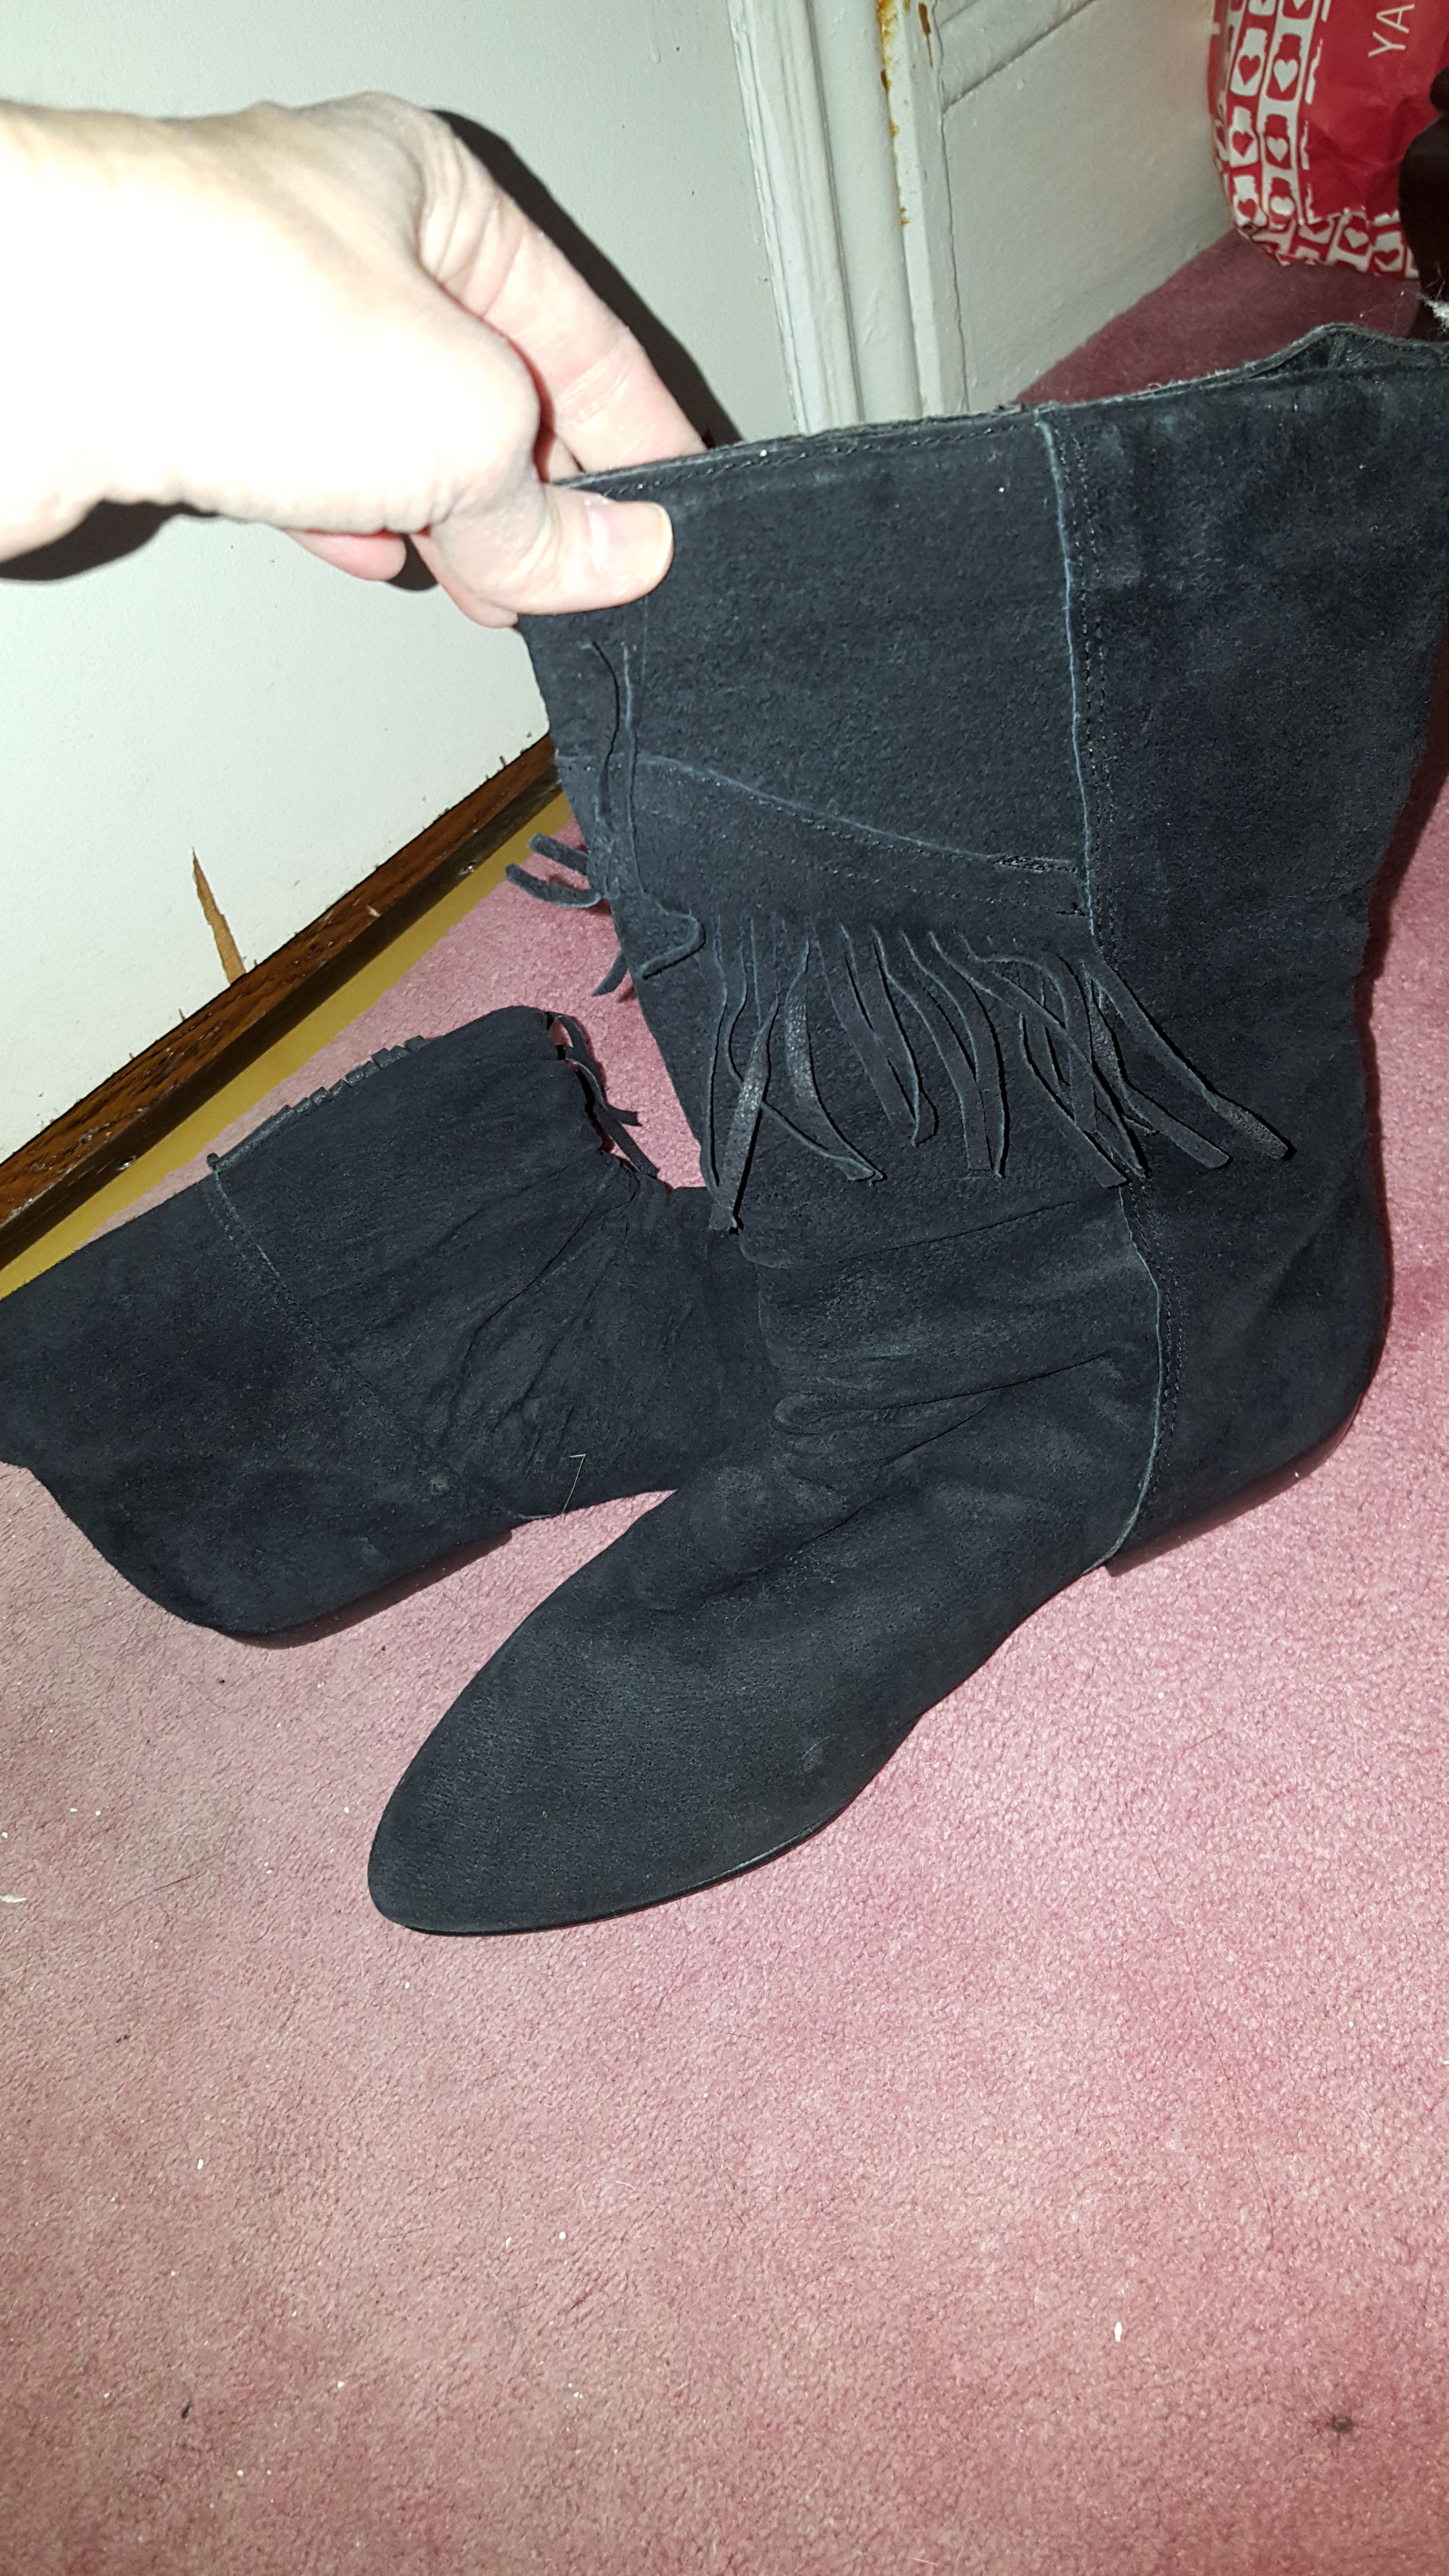 Women's suede fringe boots size 7 1/2